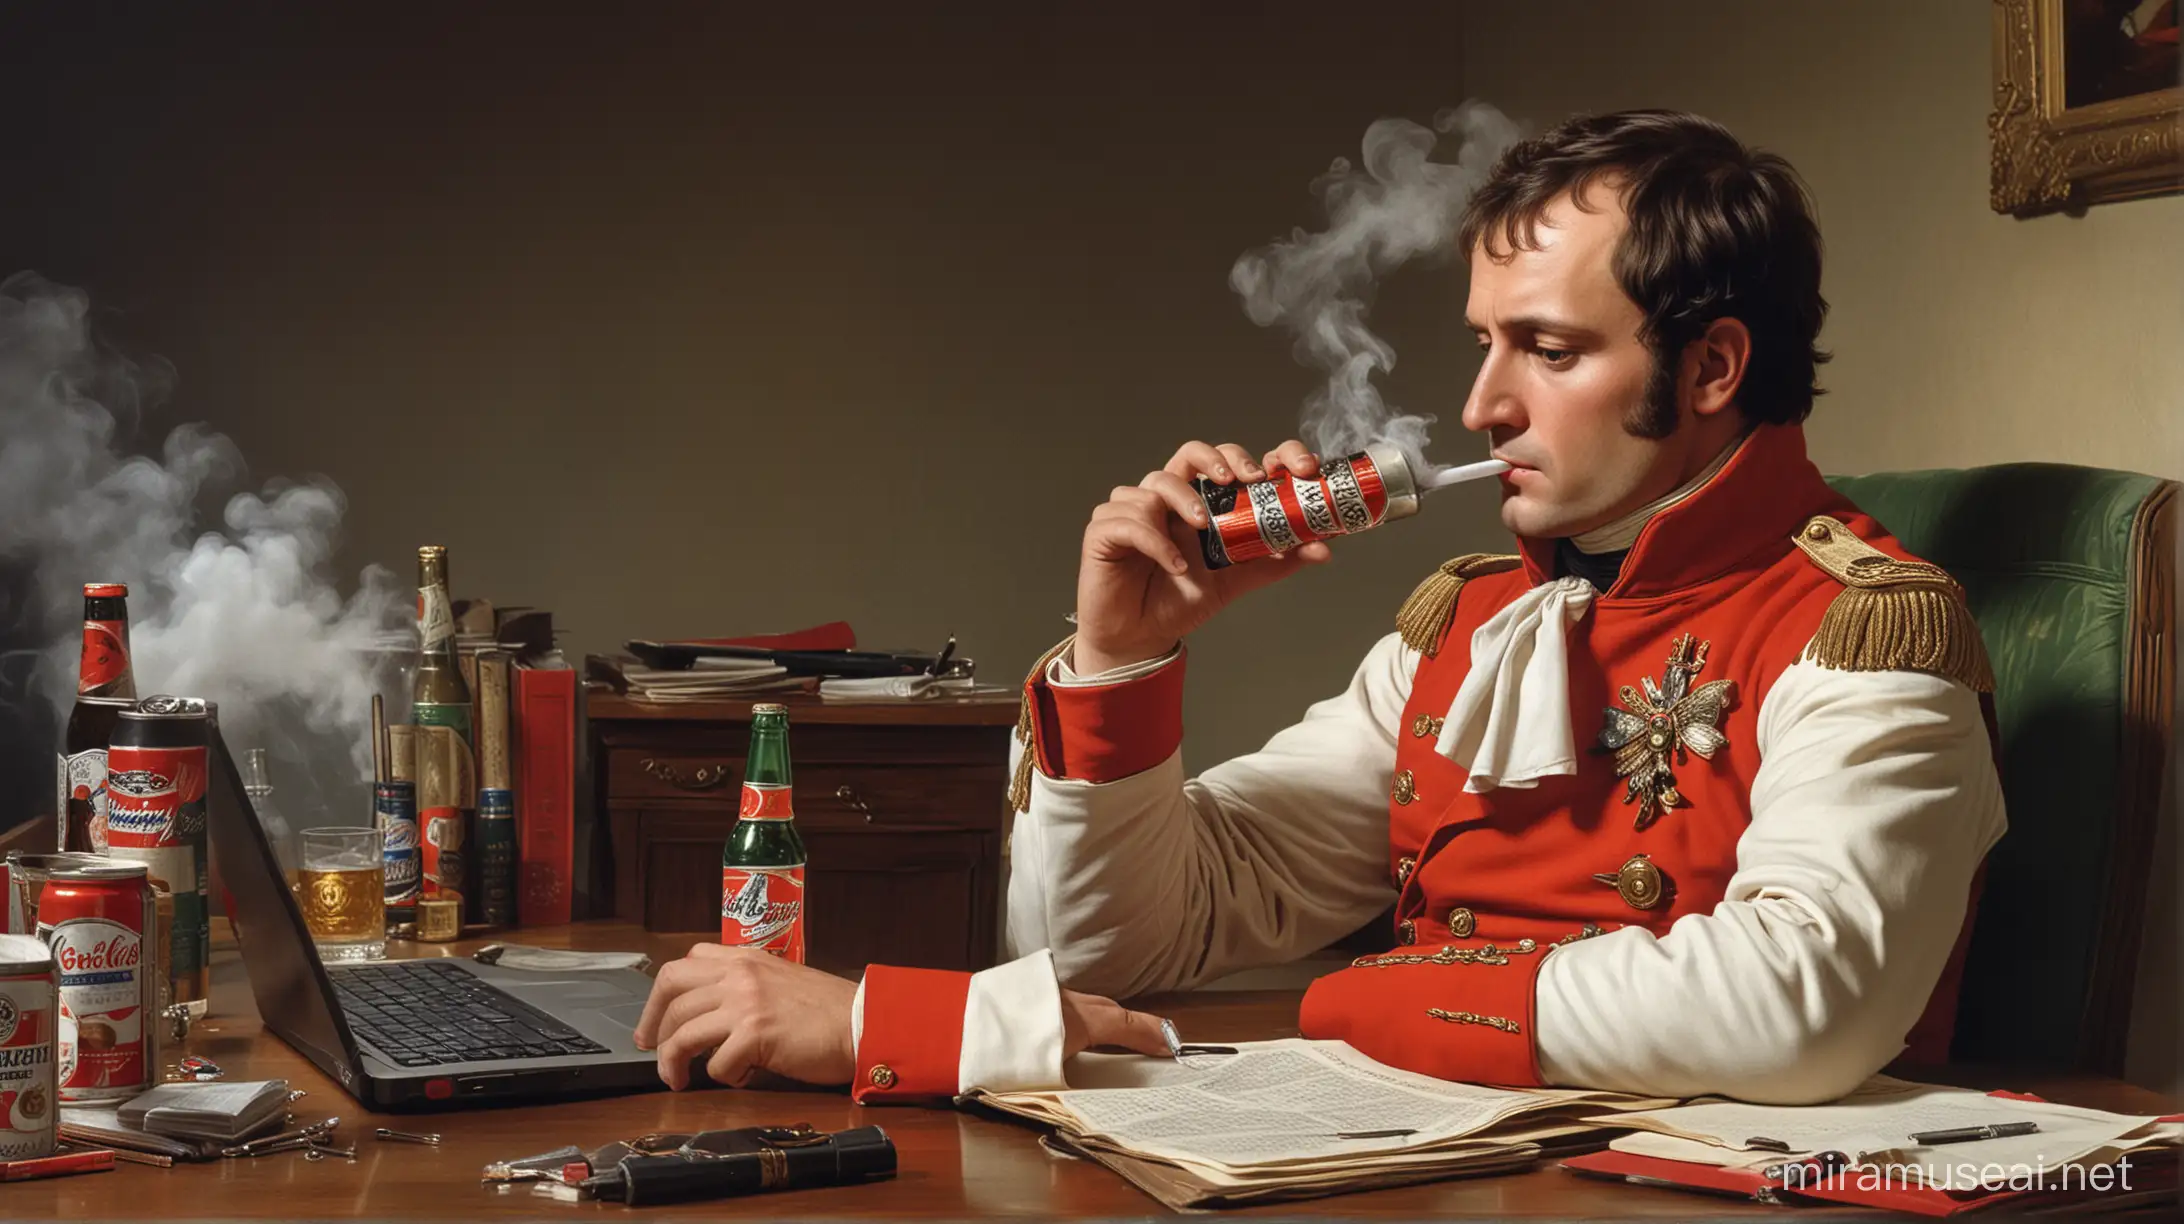 Napoleon, vaping intensely and drinking a can Budweiser beer in his large study in 1802, a LAPTOP computer on the desk shows his emails